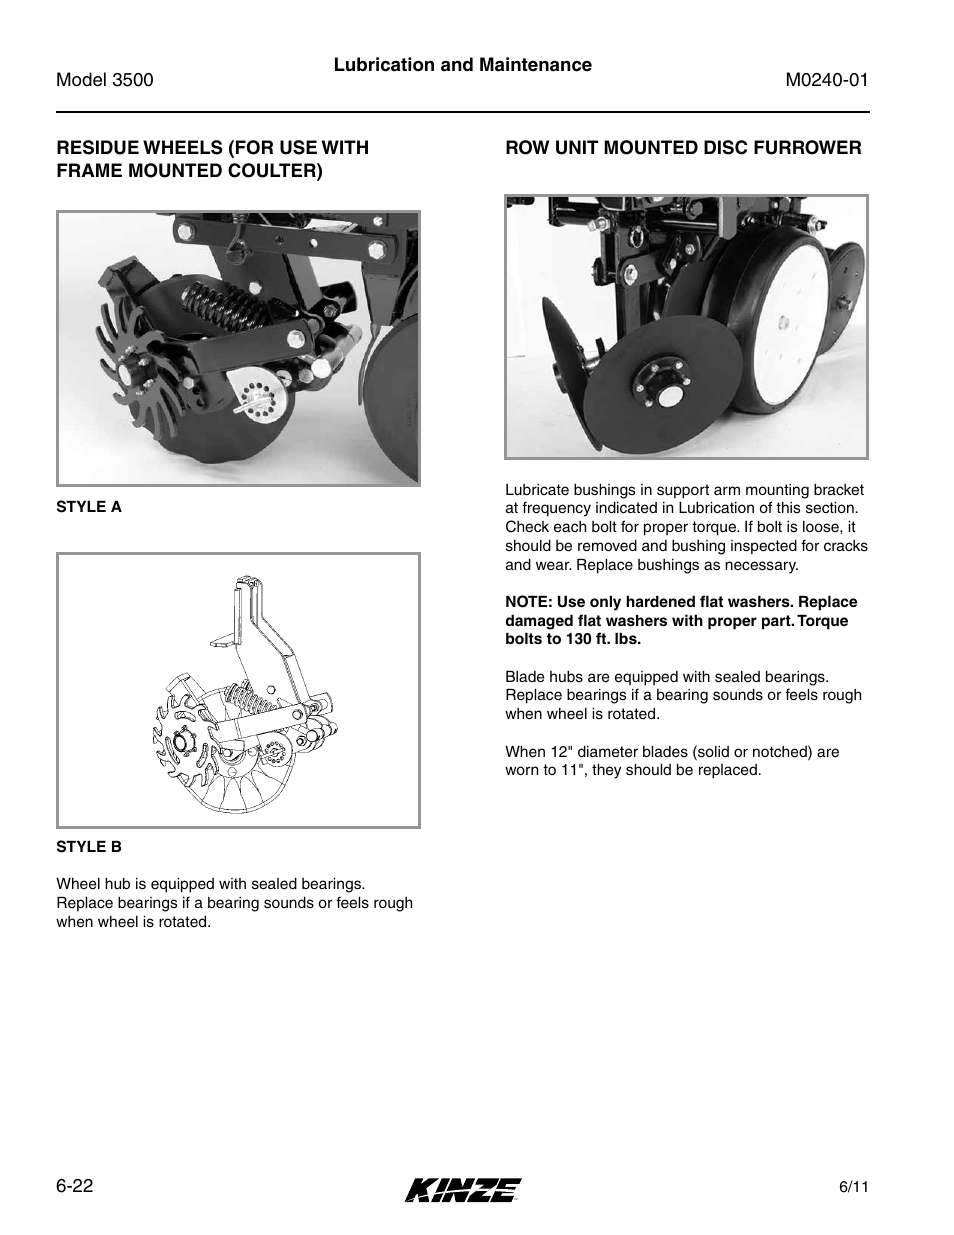 Kinze 3500 Lift and Rotate Planter Rev. 7/14 User Manual | Page 118 / 140